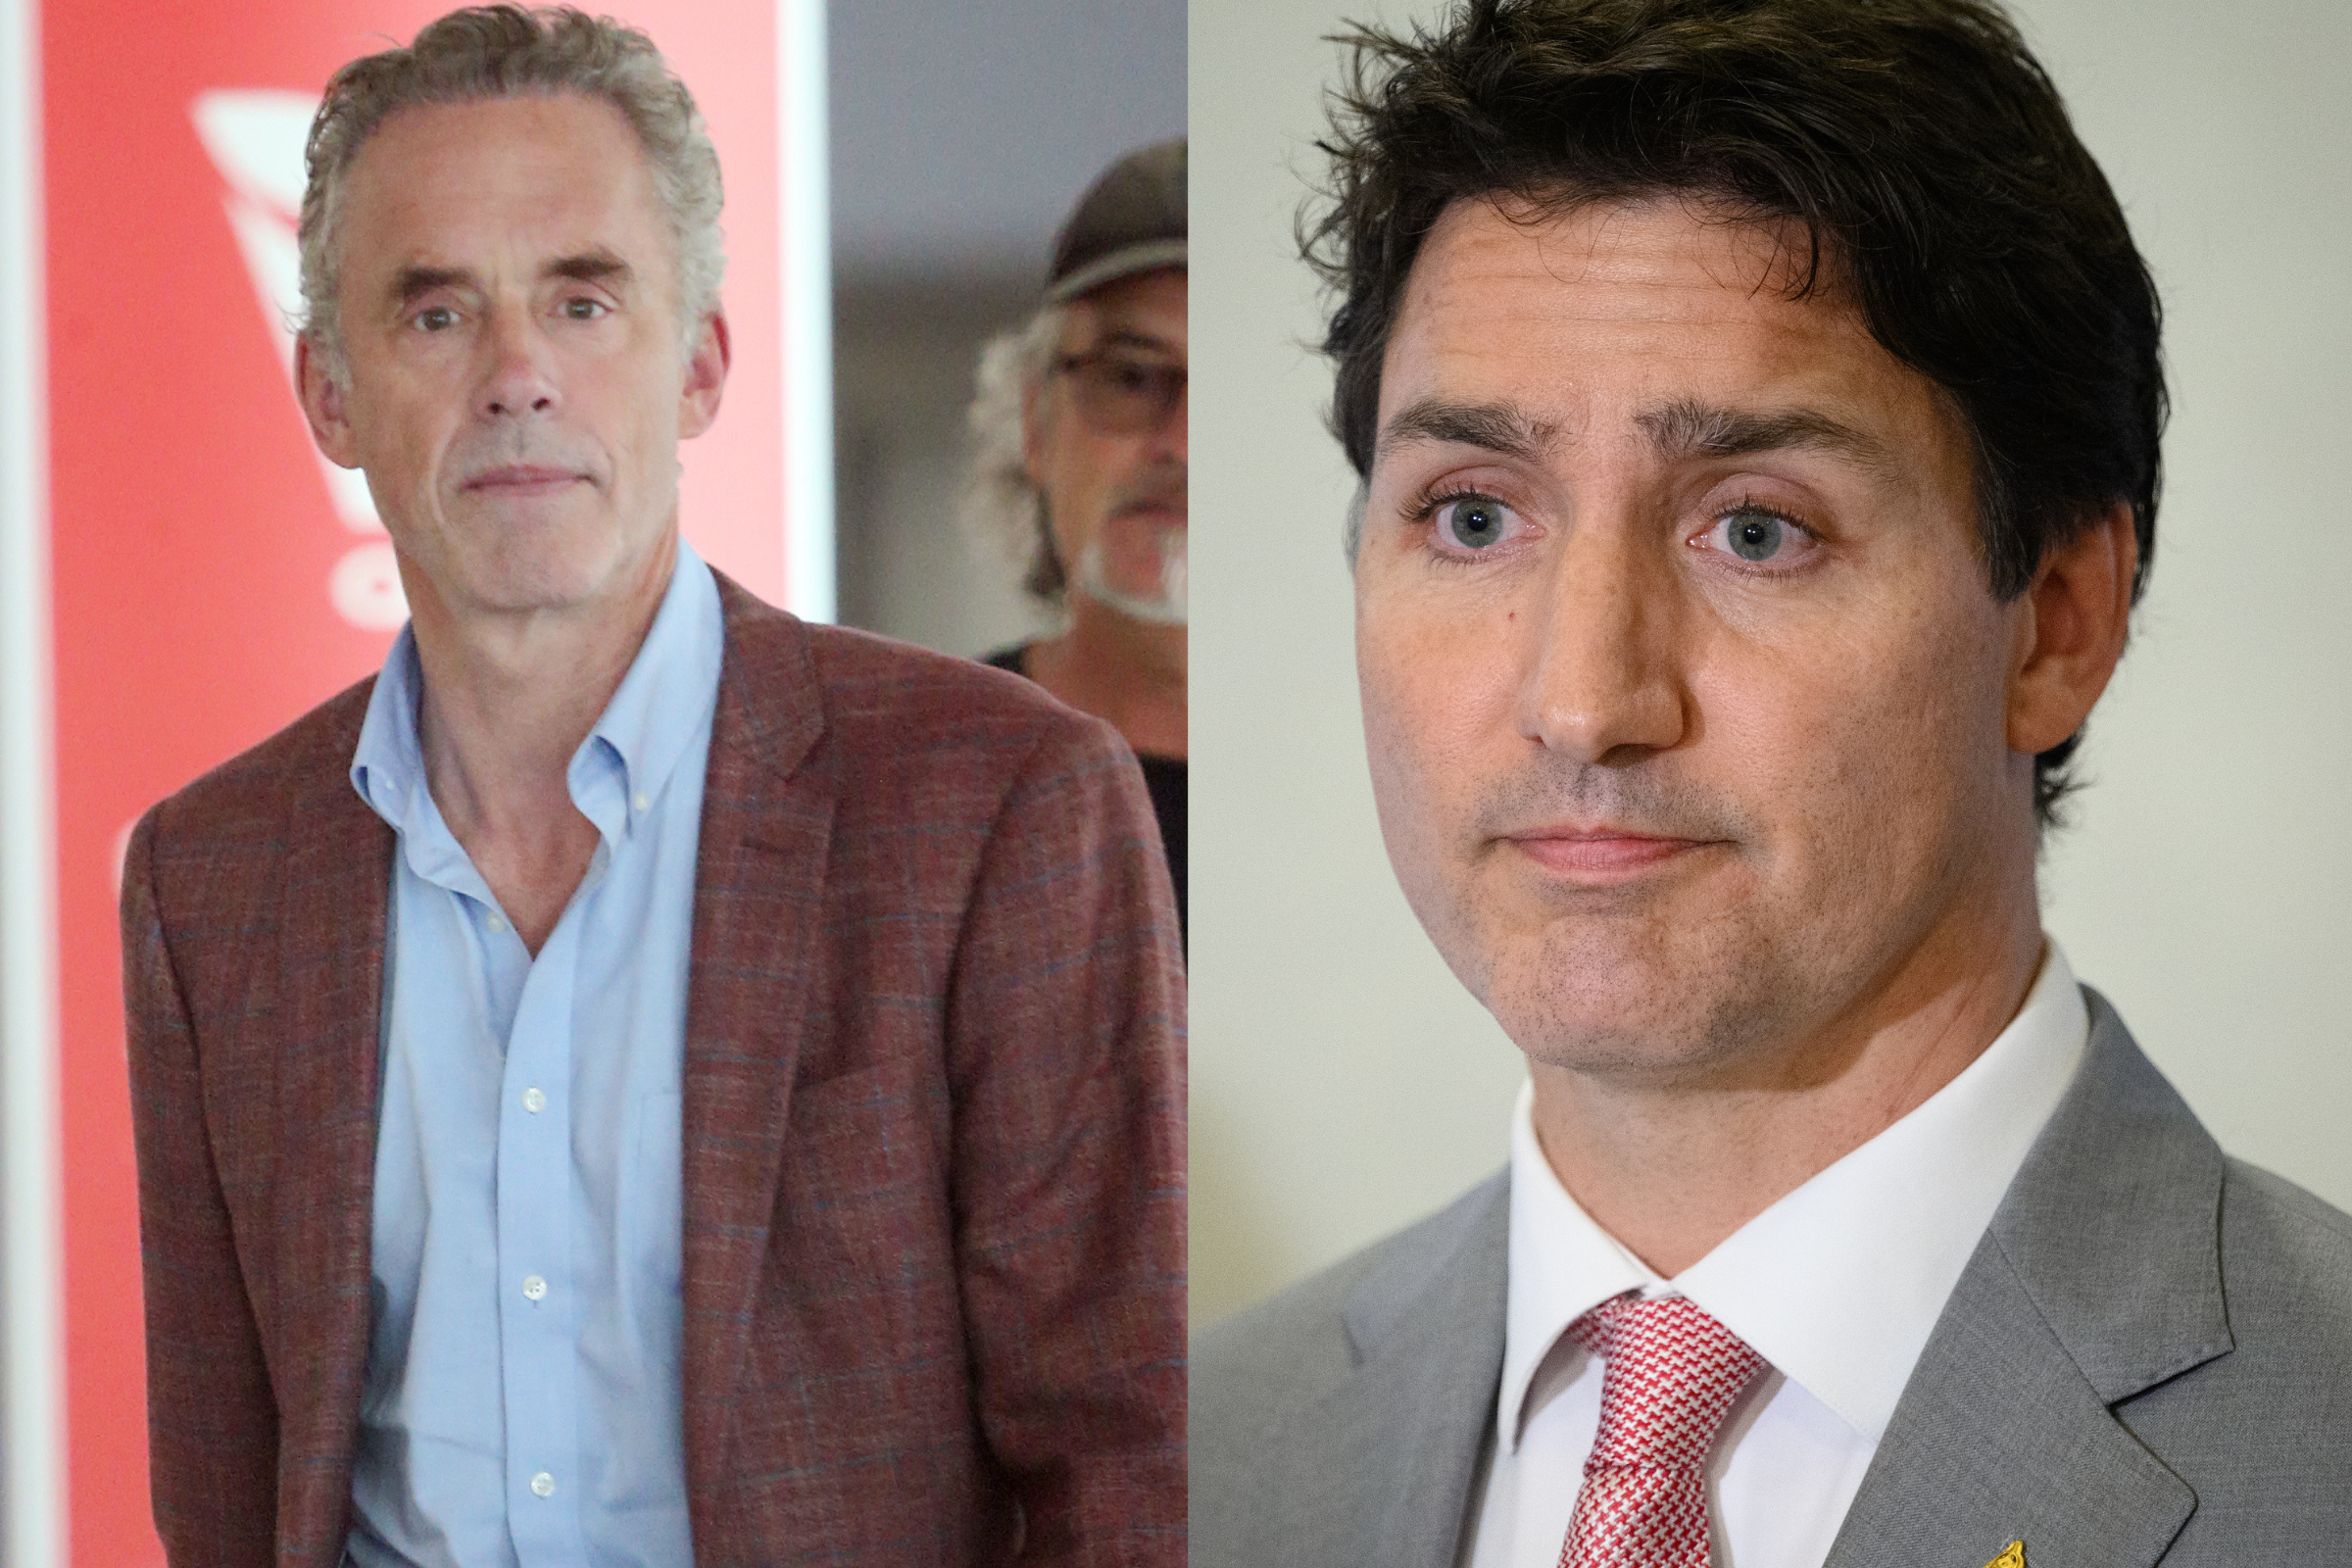 Jordan Peterson Compares Justin Trudeau to Disney Character in Viral Post